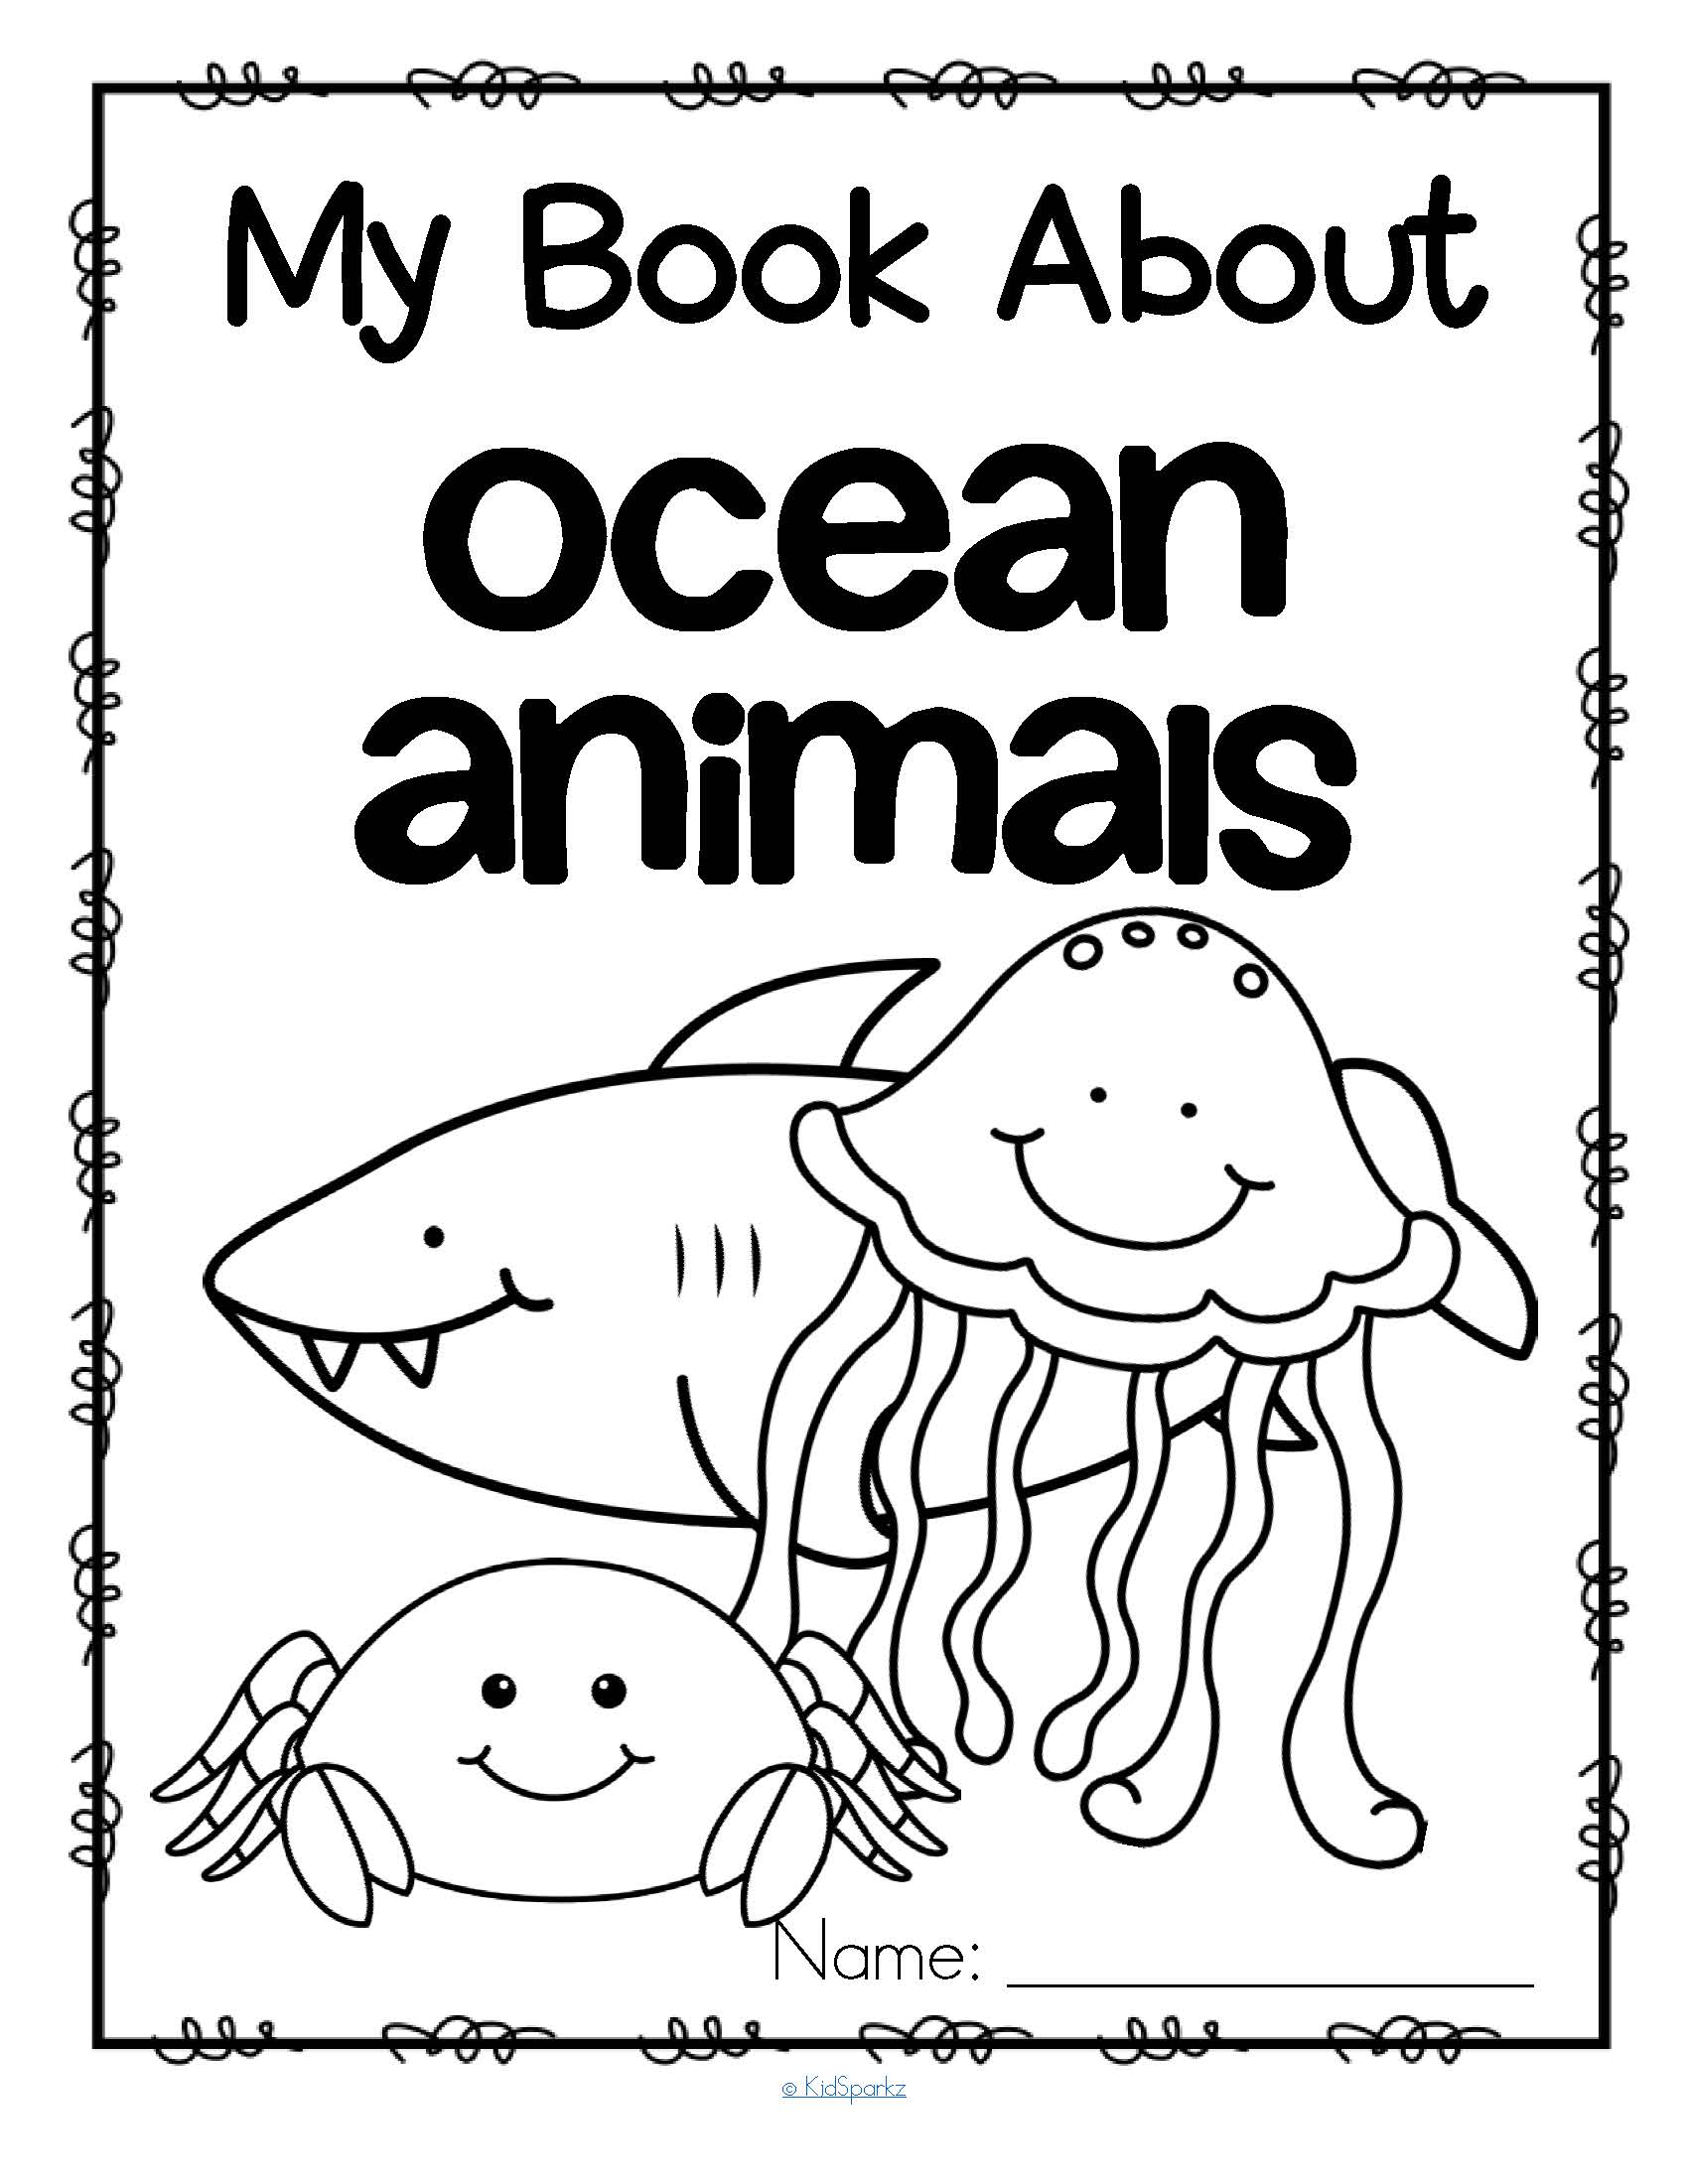 My Book About Ocean Animals